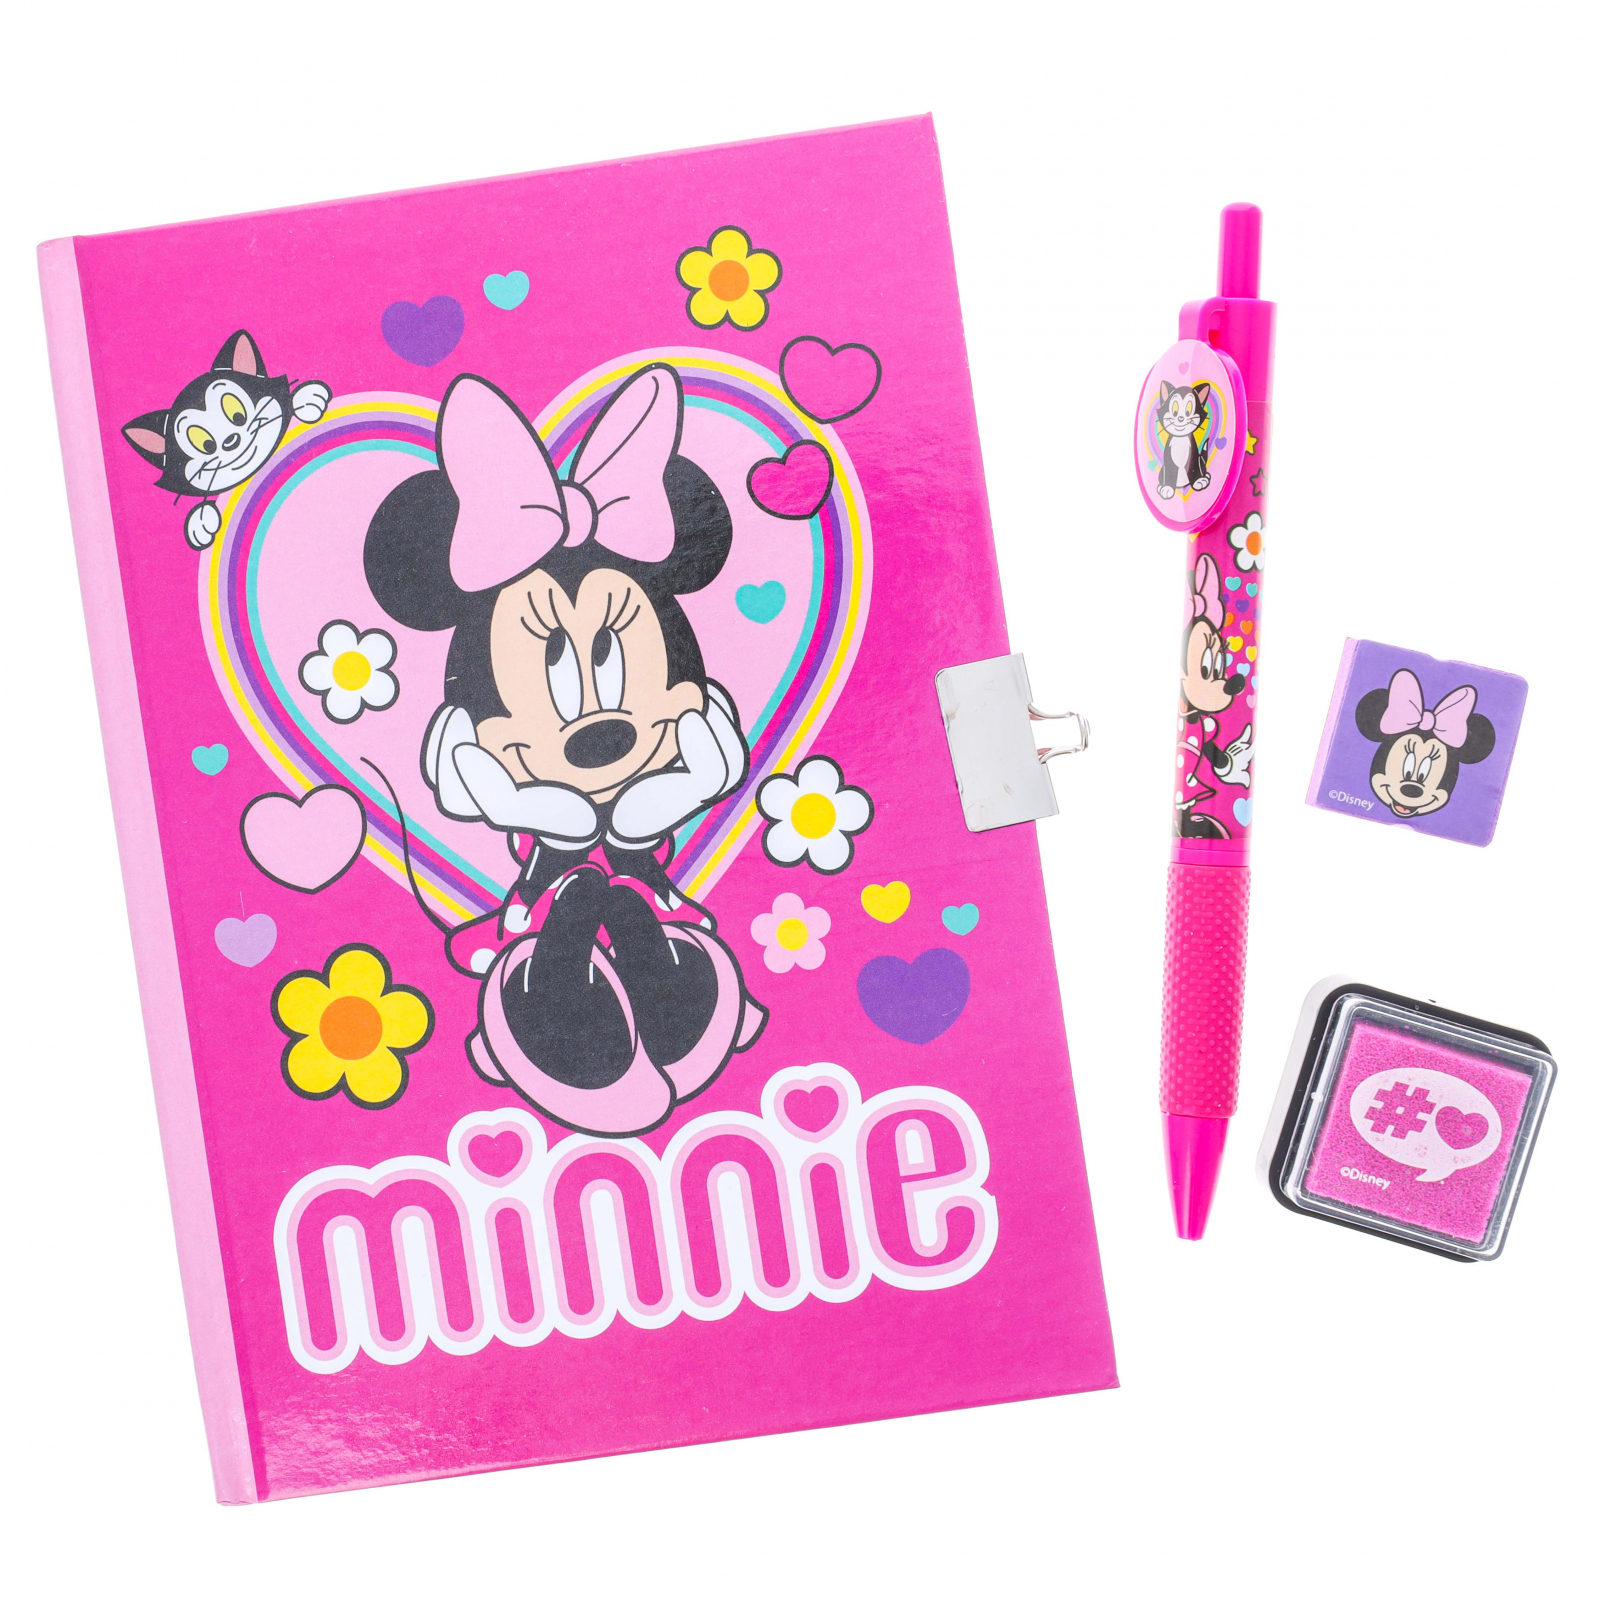 Disney Minnie Mouse 8pc Diary with Lock Stationery Set Girls Ages 3 and Up